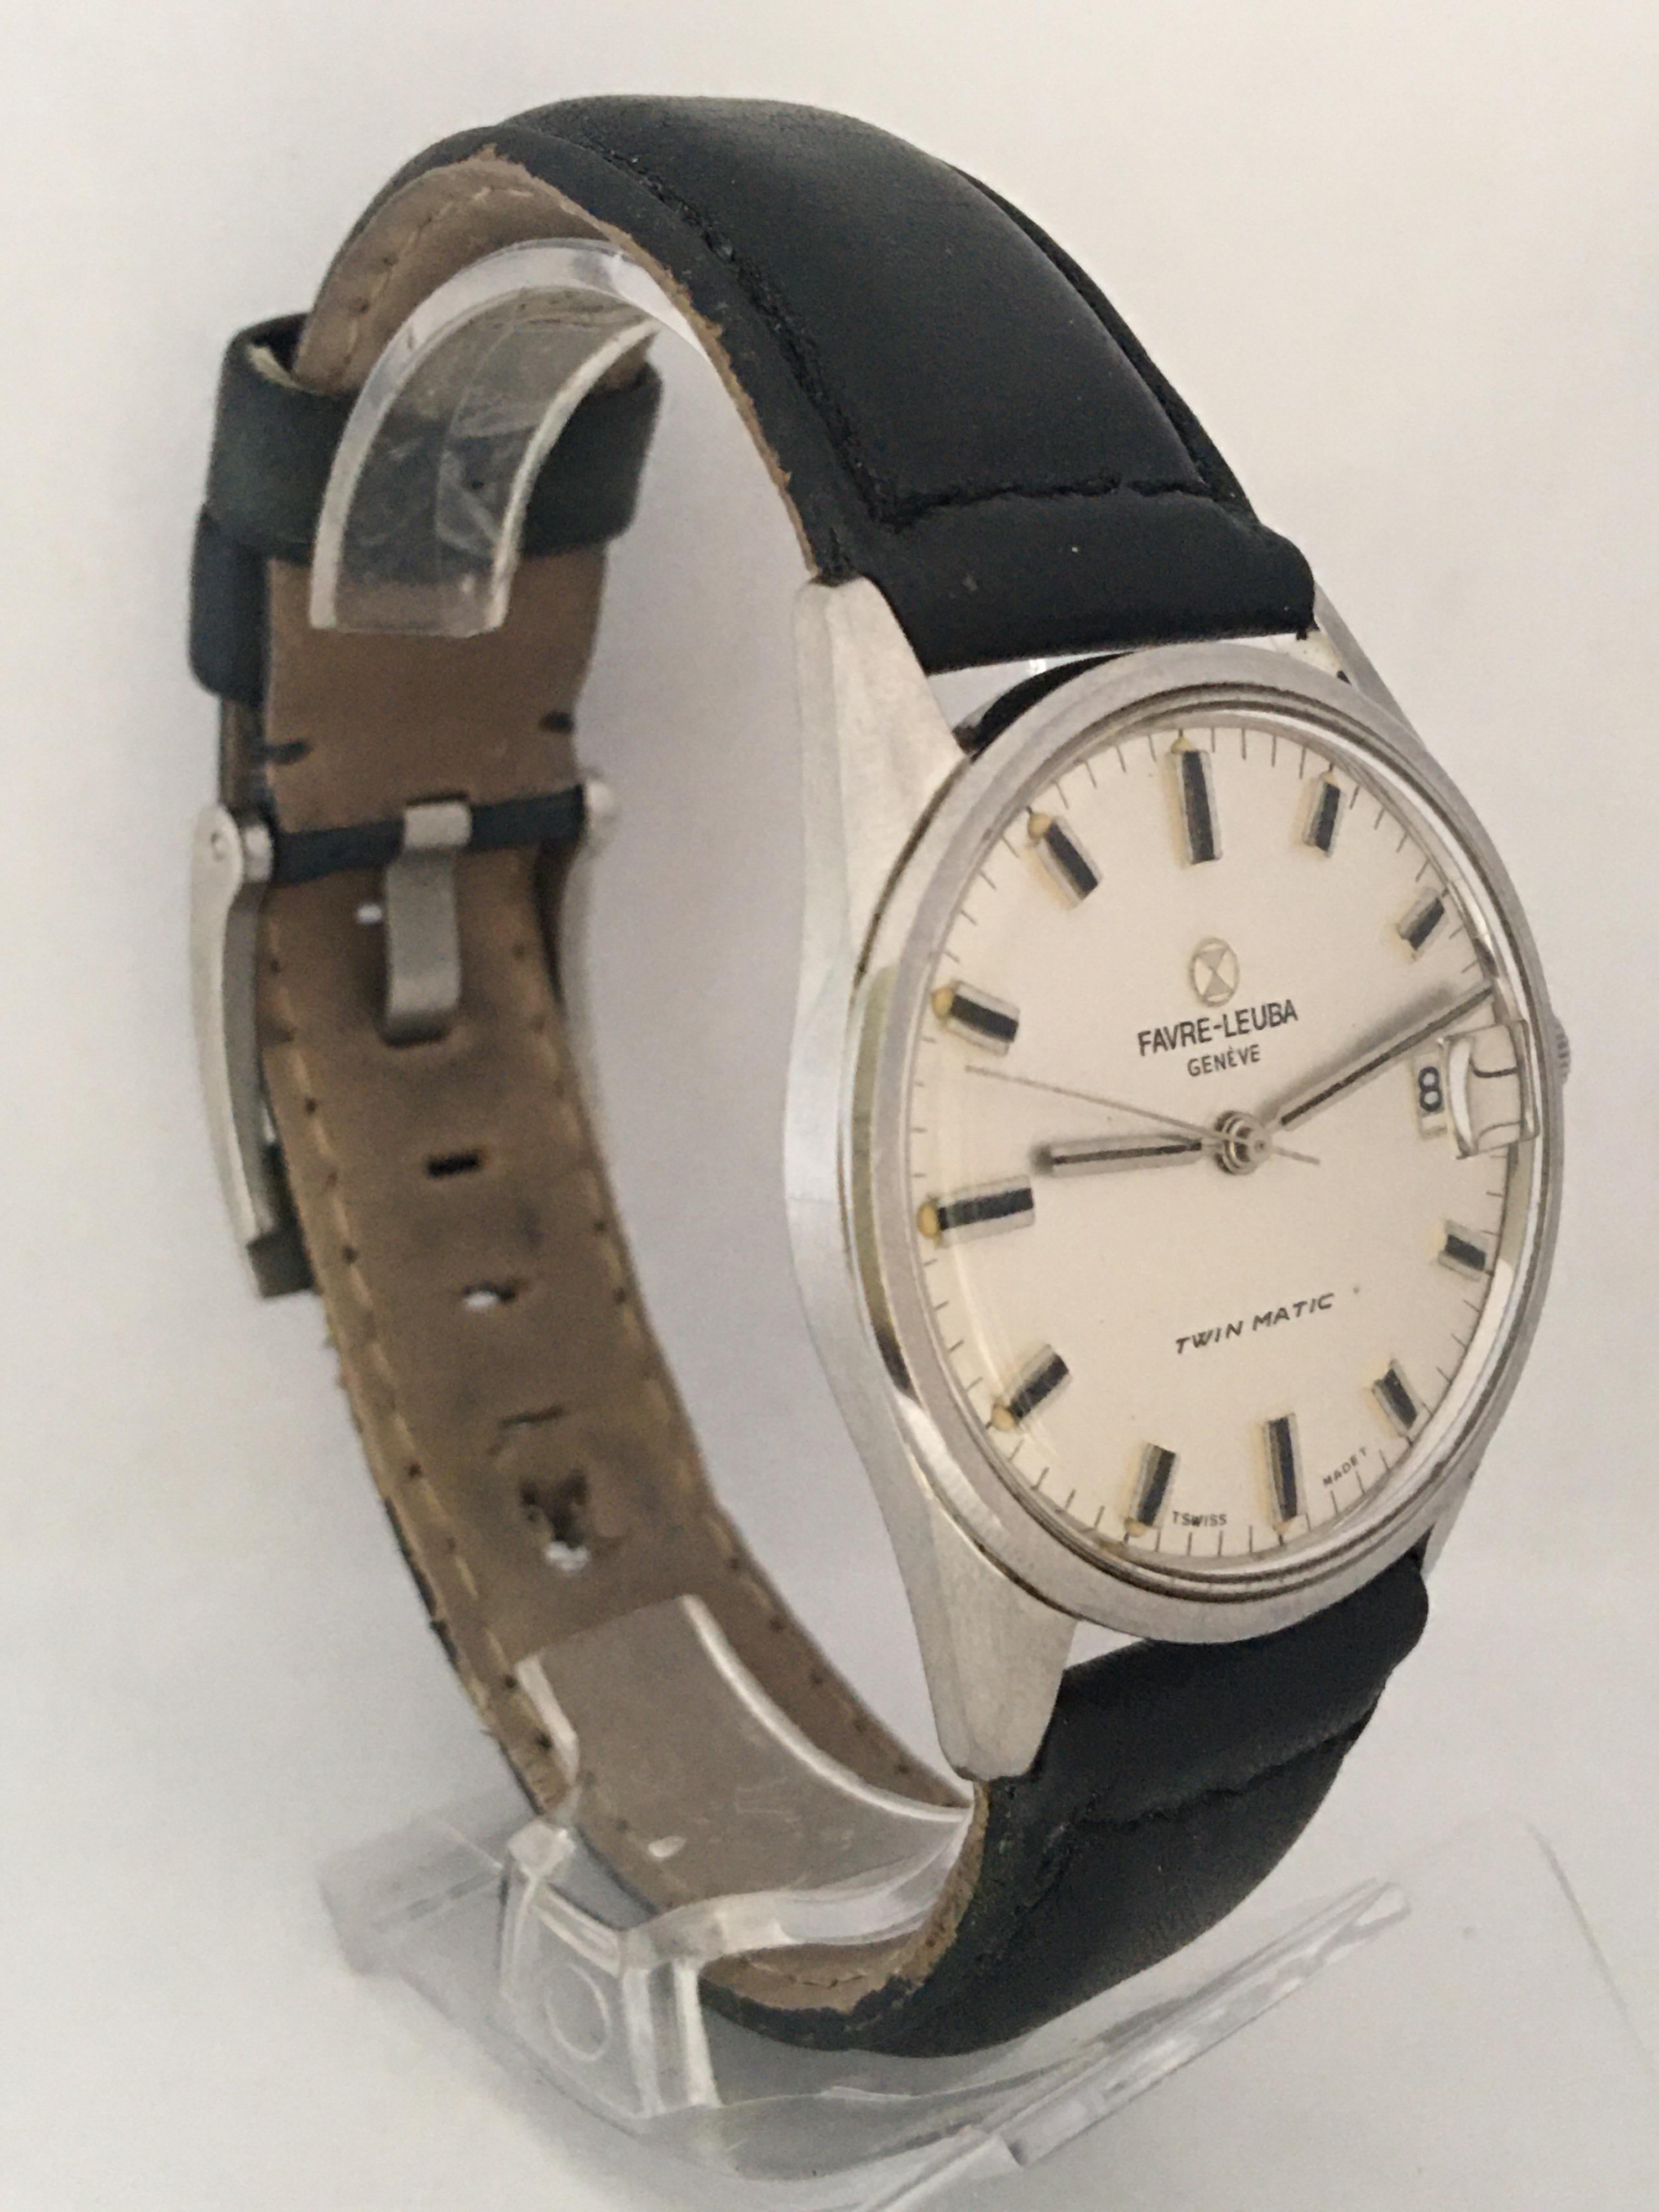 This beautiful pre-owned 35mm diameter (excluding crown) vintage automatic watch is in good working condition. It is recently been serviced and it runs well. Visible signs of ageing and wear with a tiny scratch on the glass and some light scratches